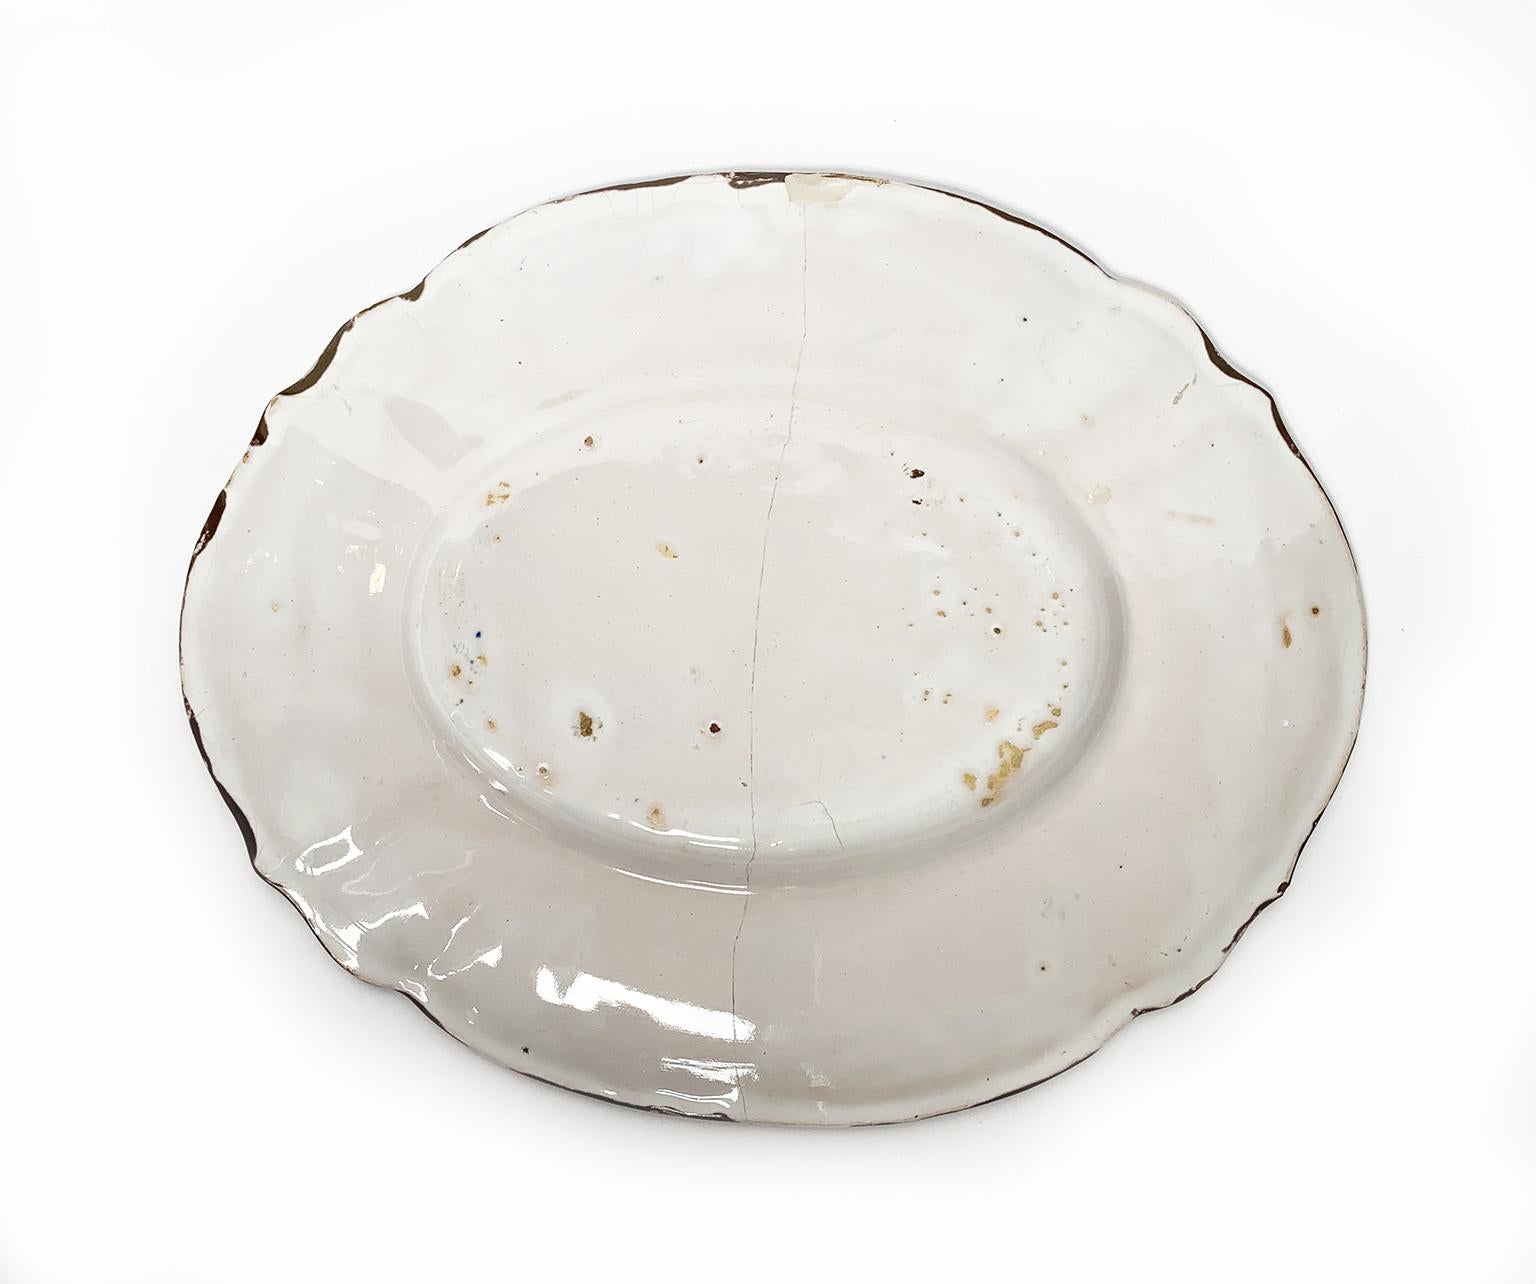 Glazed Maiolica Oval Tray, Felice Clerici Manufactory, Milan, Circa 1770-1780 For Sale